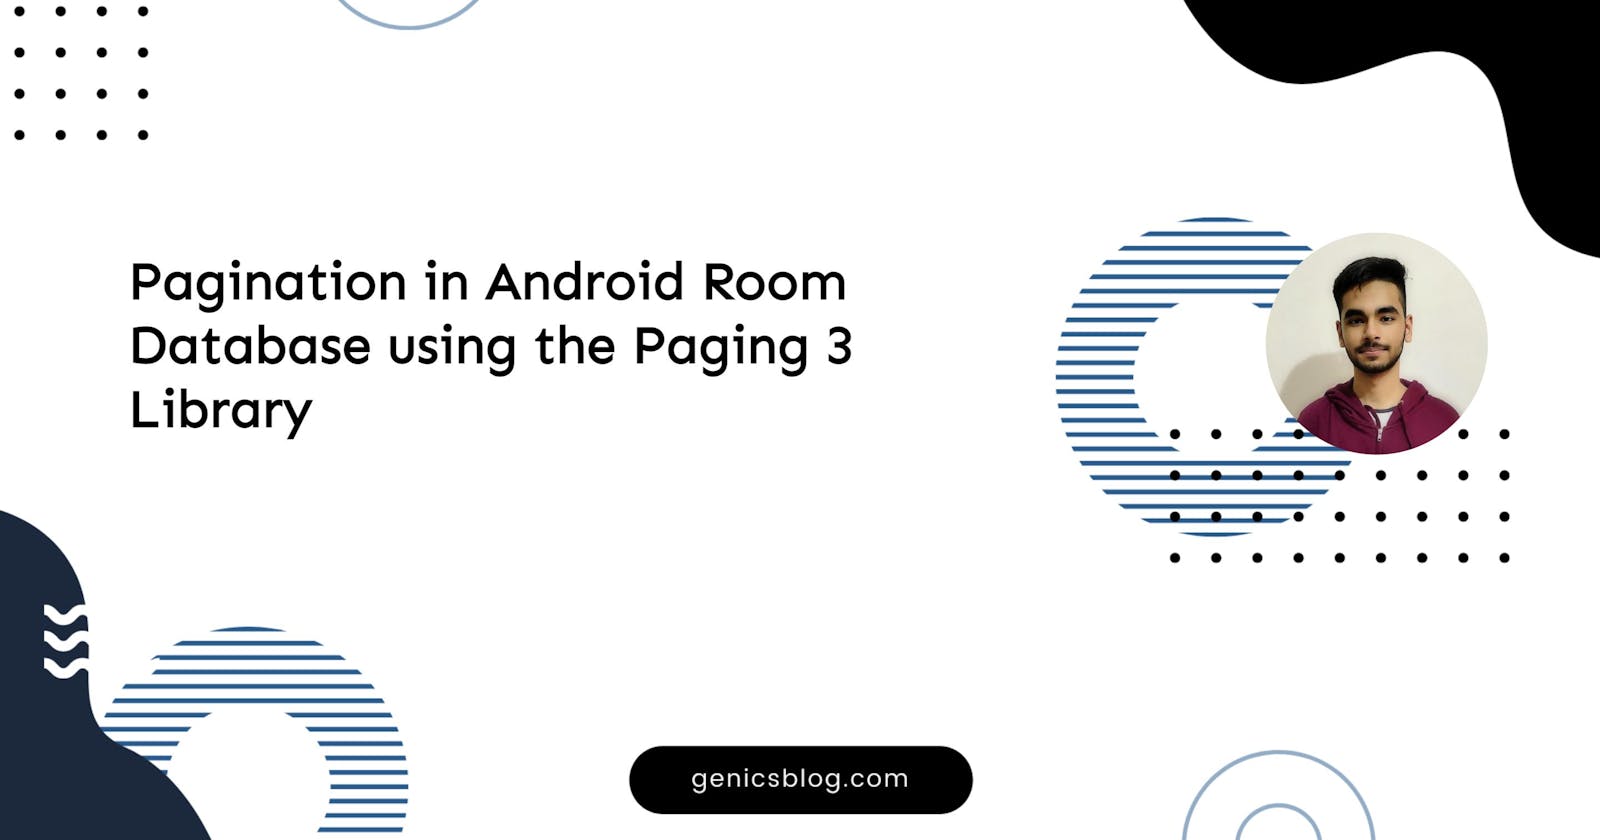 Pagination in Android Room Database using the Paging 3 Library